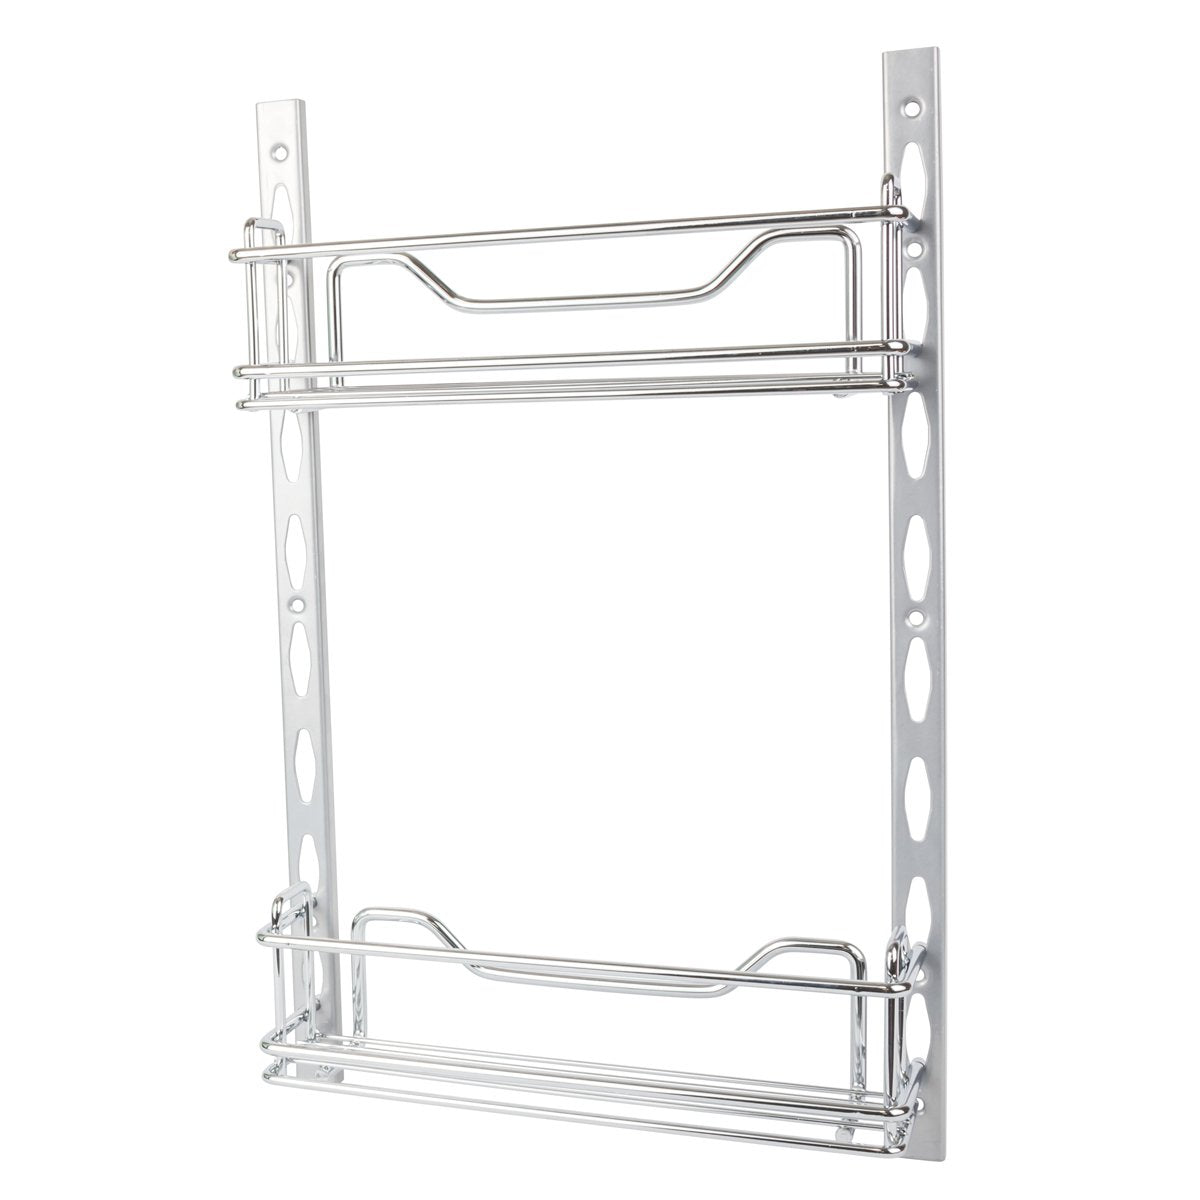 Hardware Resources 3" Deep Door Mounted Tray System Kit in Polished Chrome-DirectCabinets.com